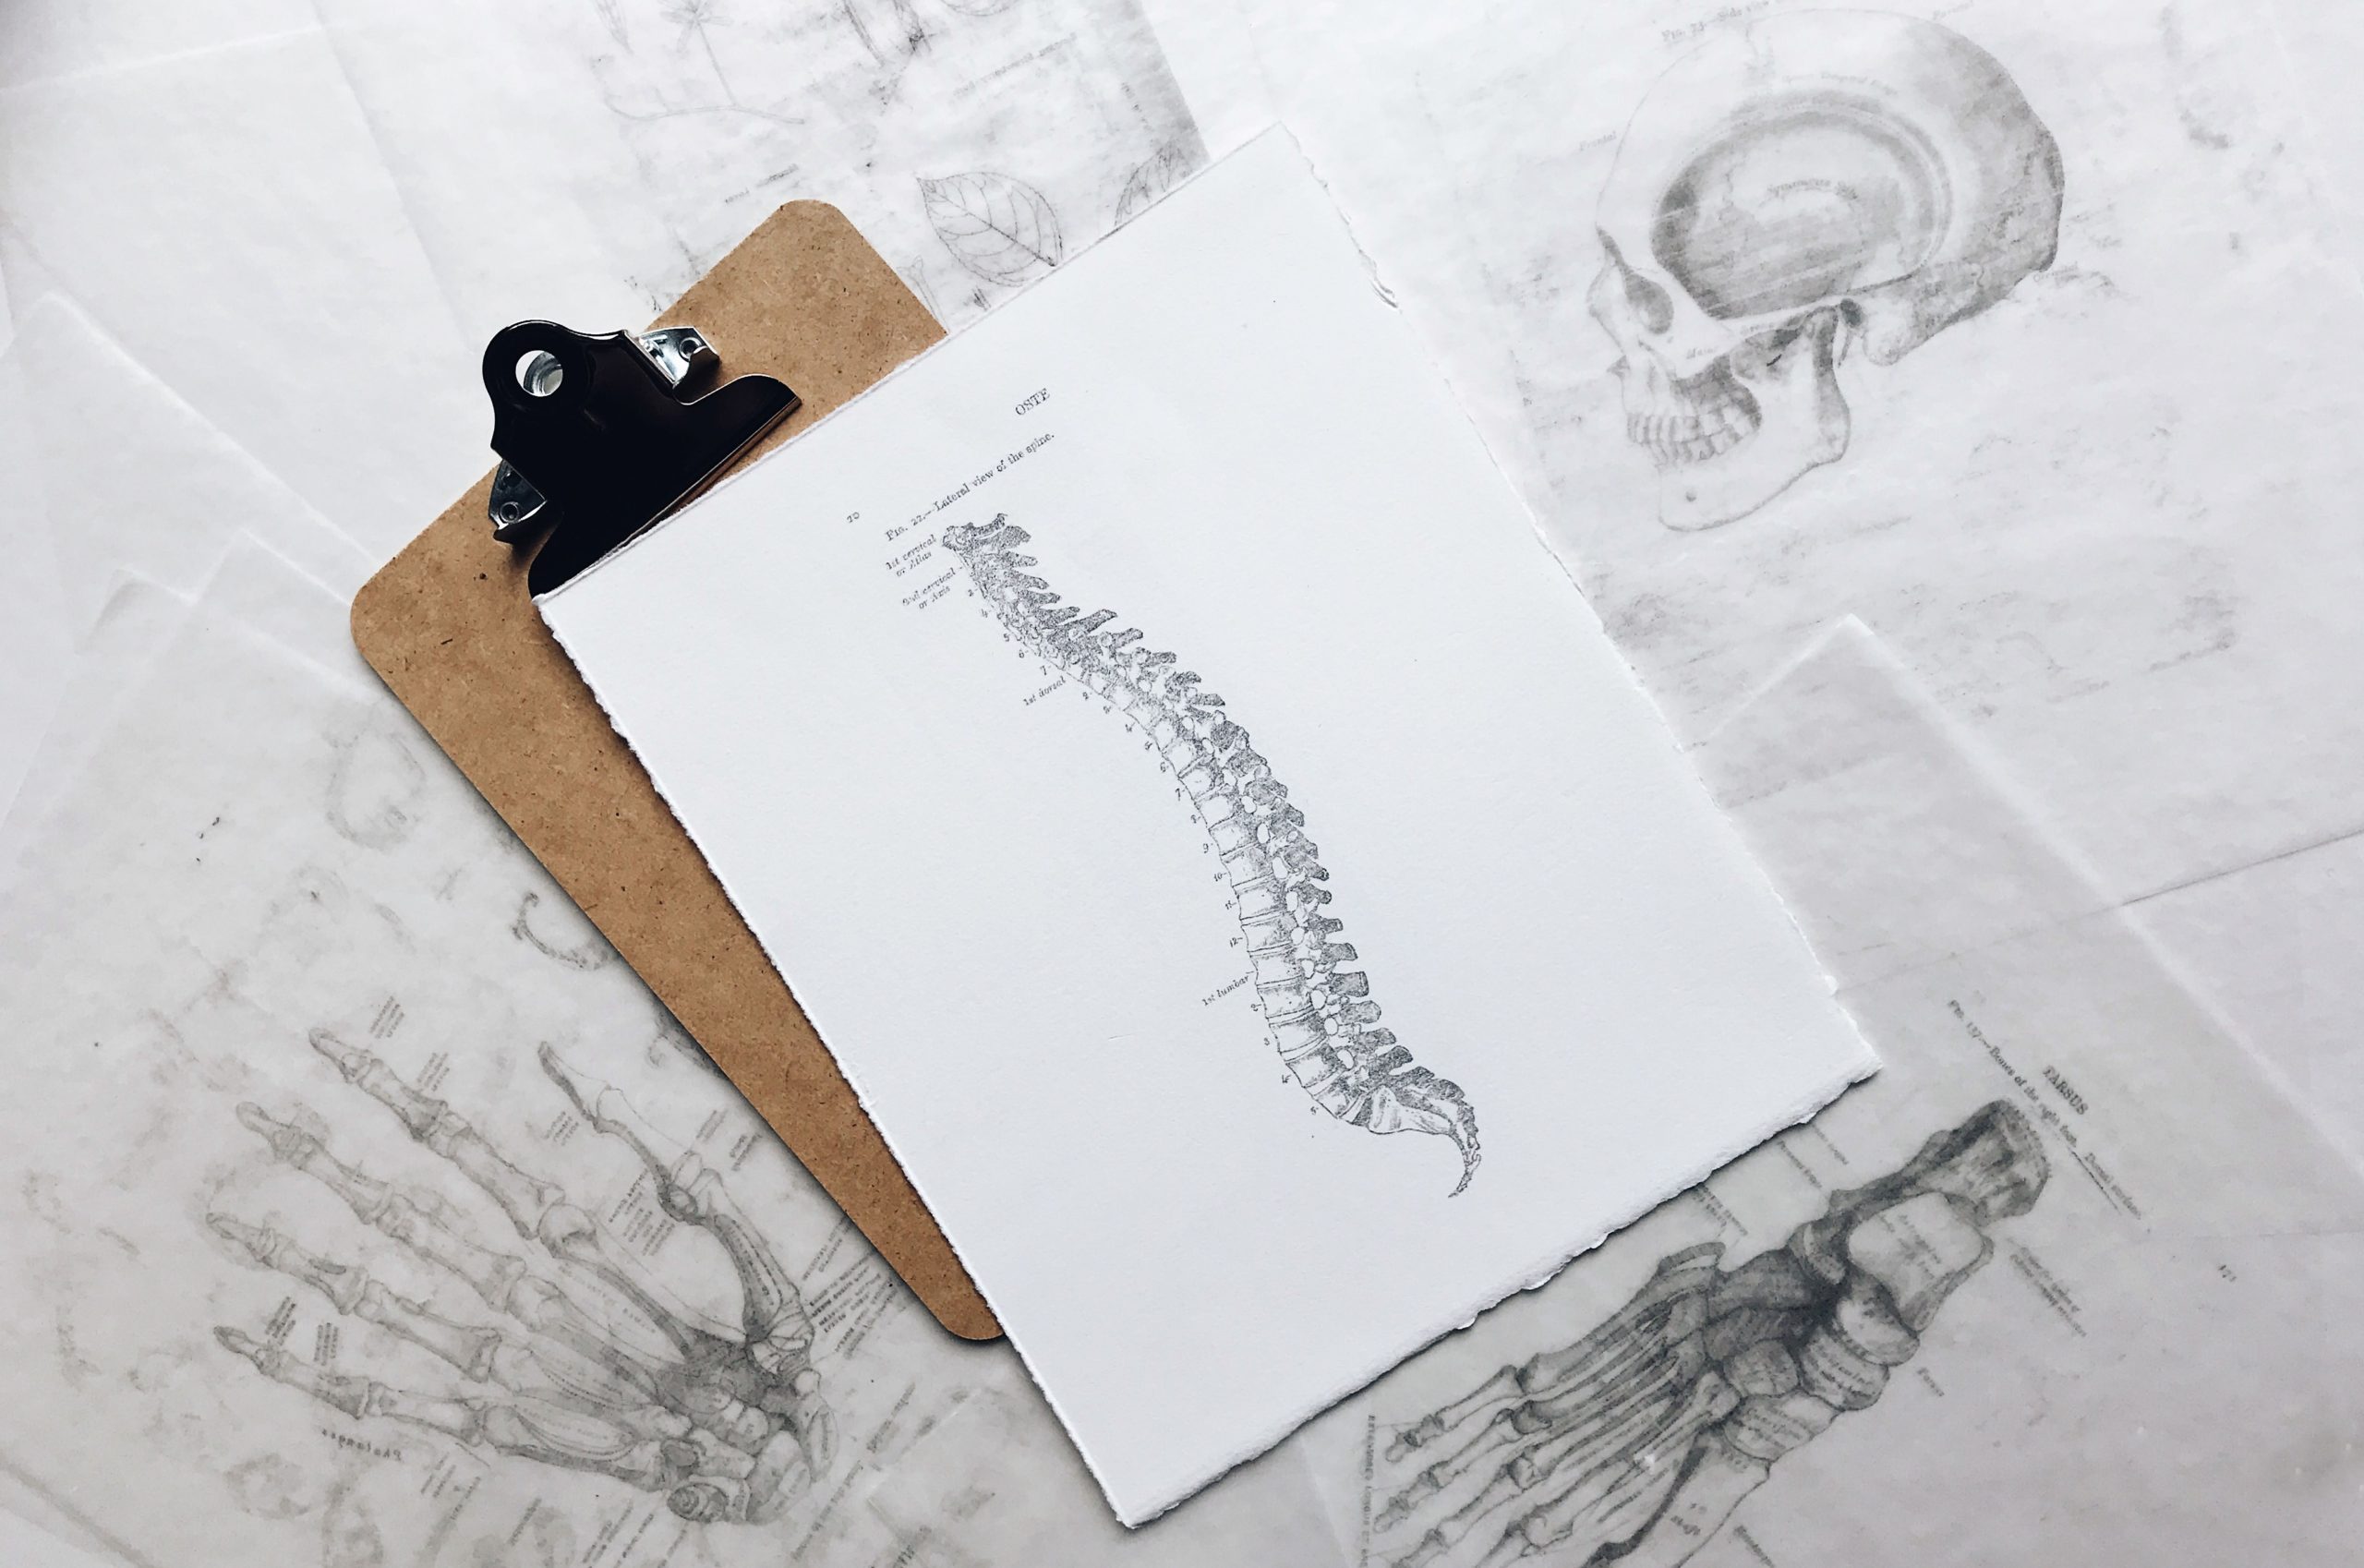 Clipboard with paper depicting a diagram of a spine